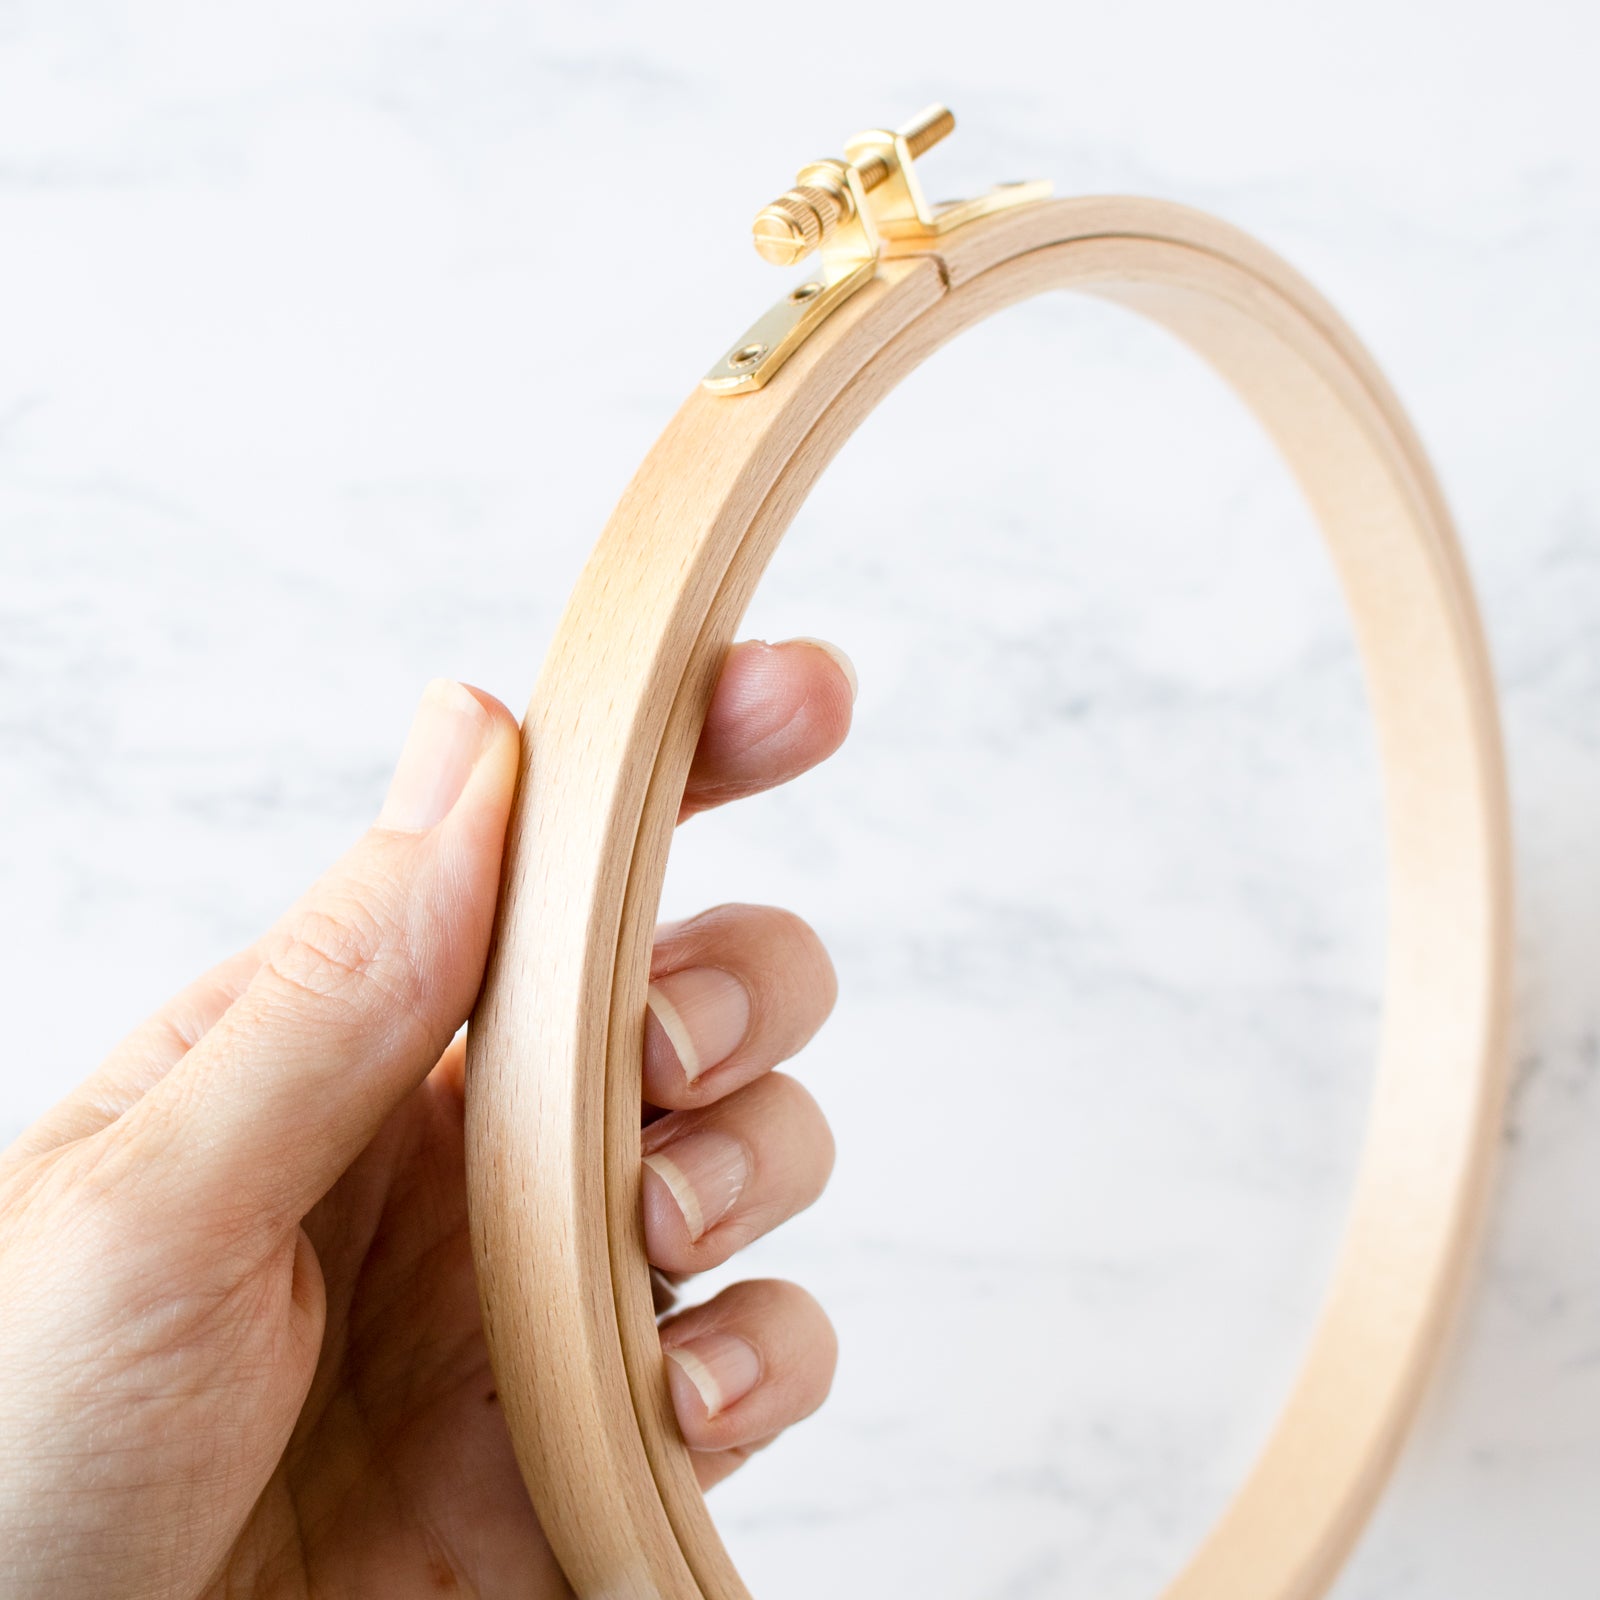 Premium Hardwood Embroidery Hoops - 5/8" Thick